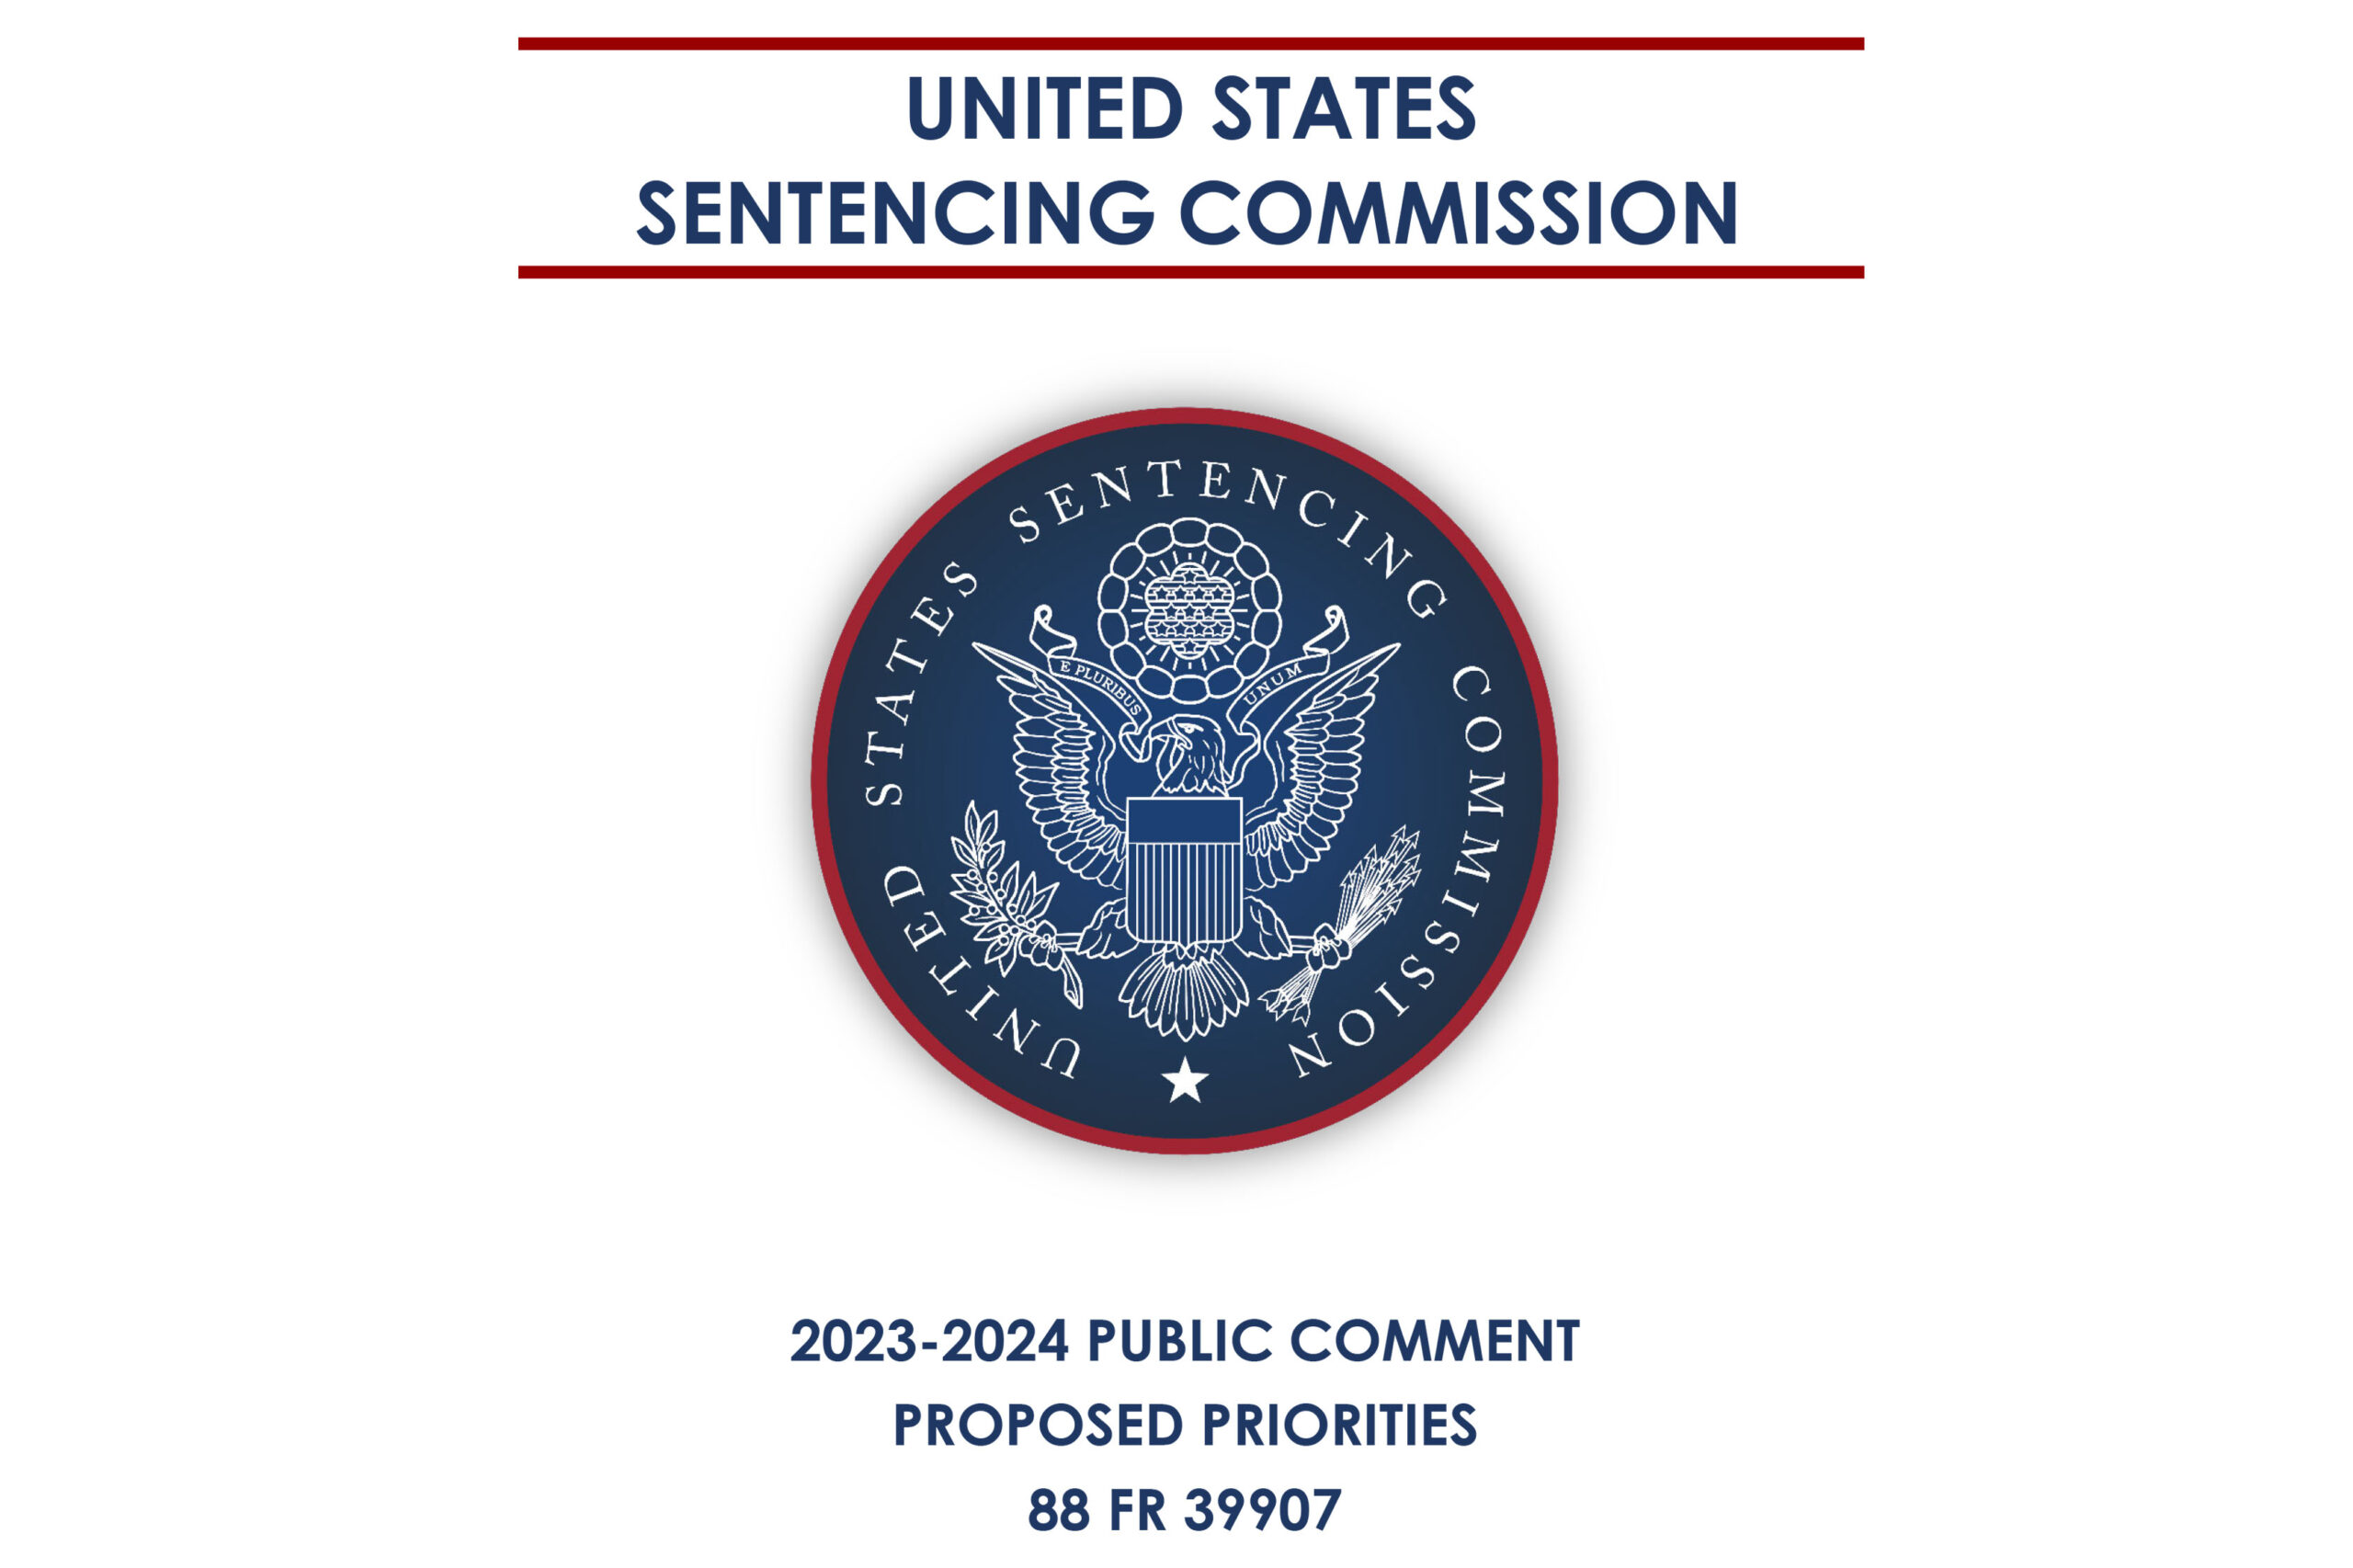 MLFA’s Published Comments on the United States Sentencing Commission 2023